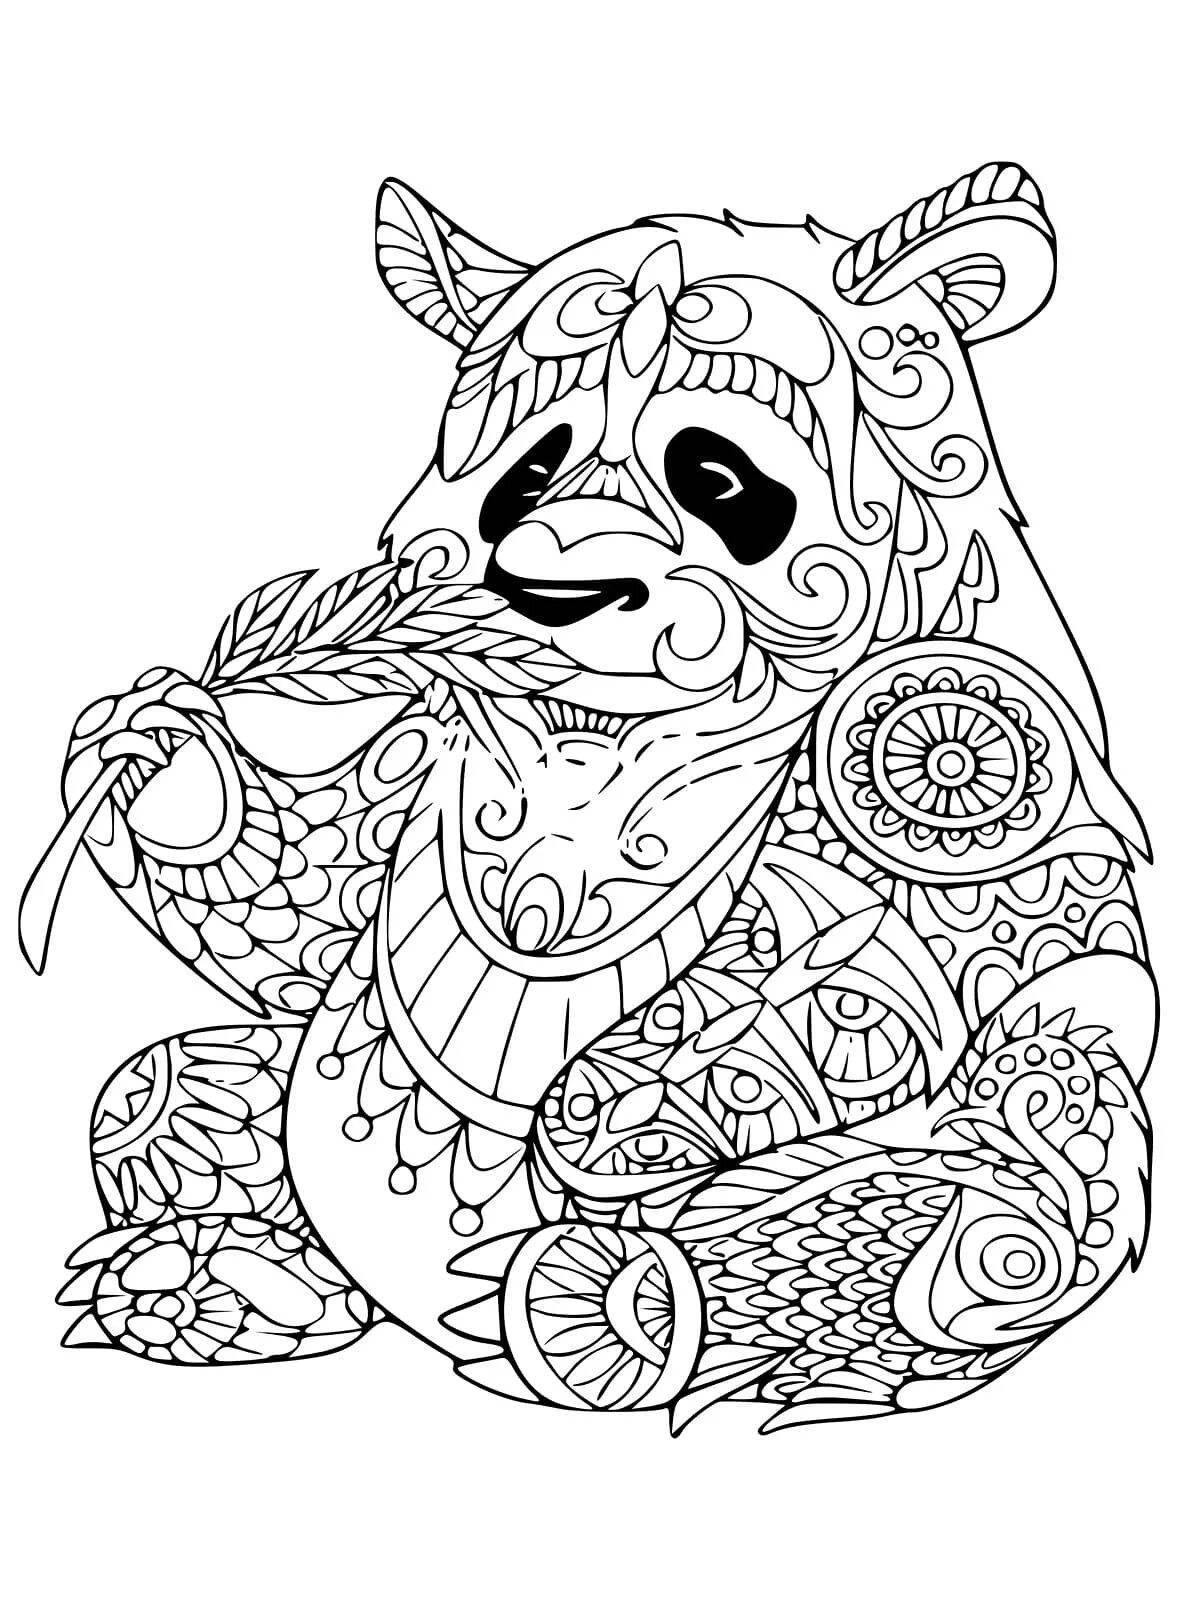 Wonderful coloring page 11 years difficult